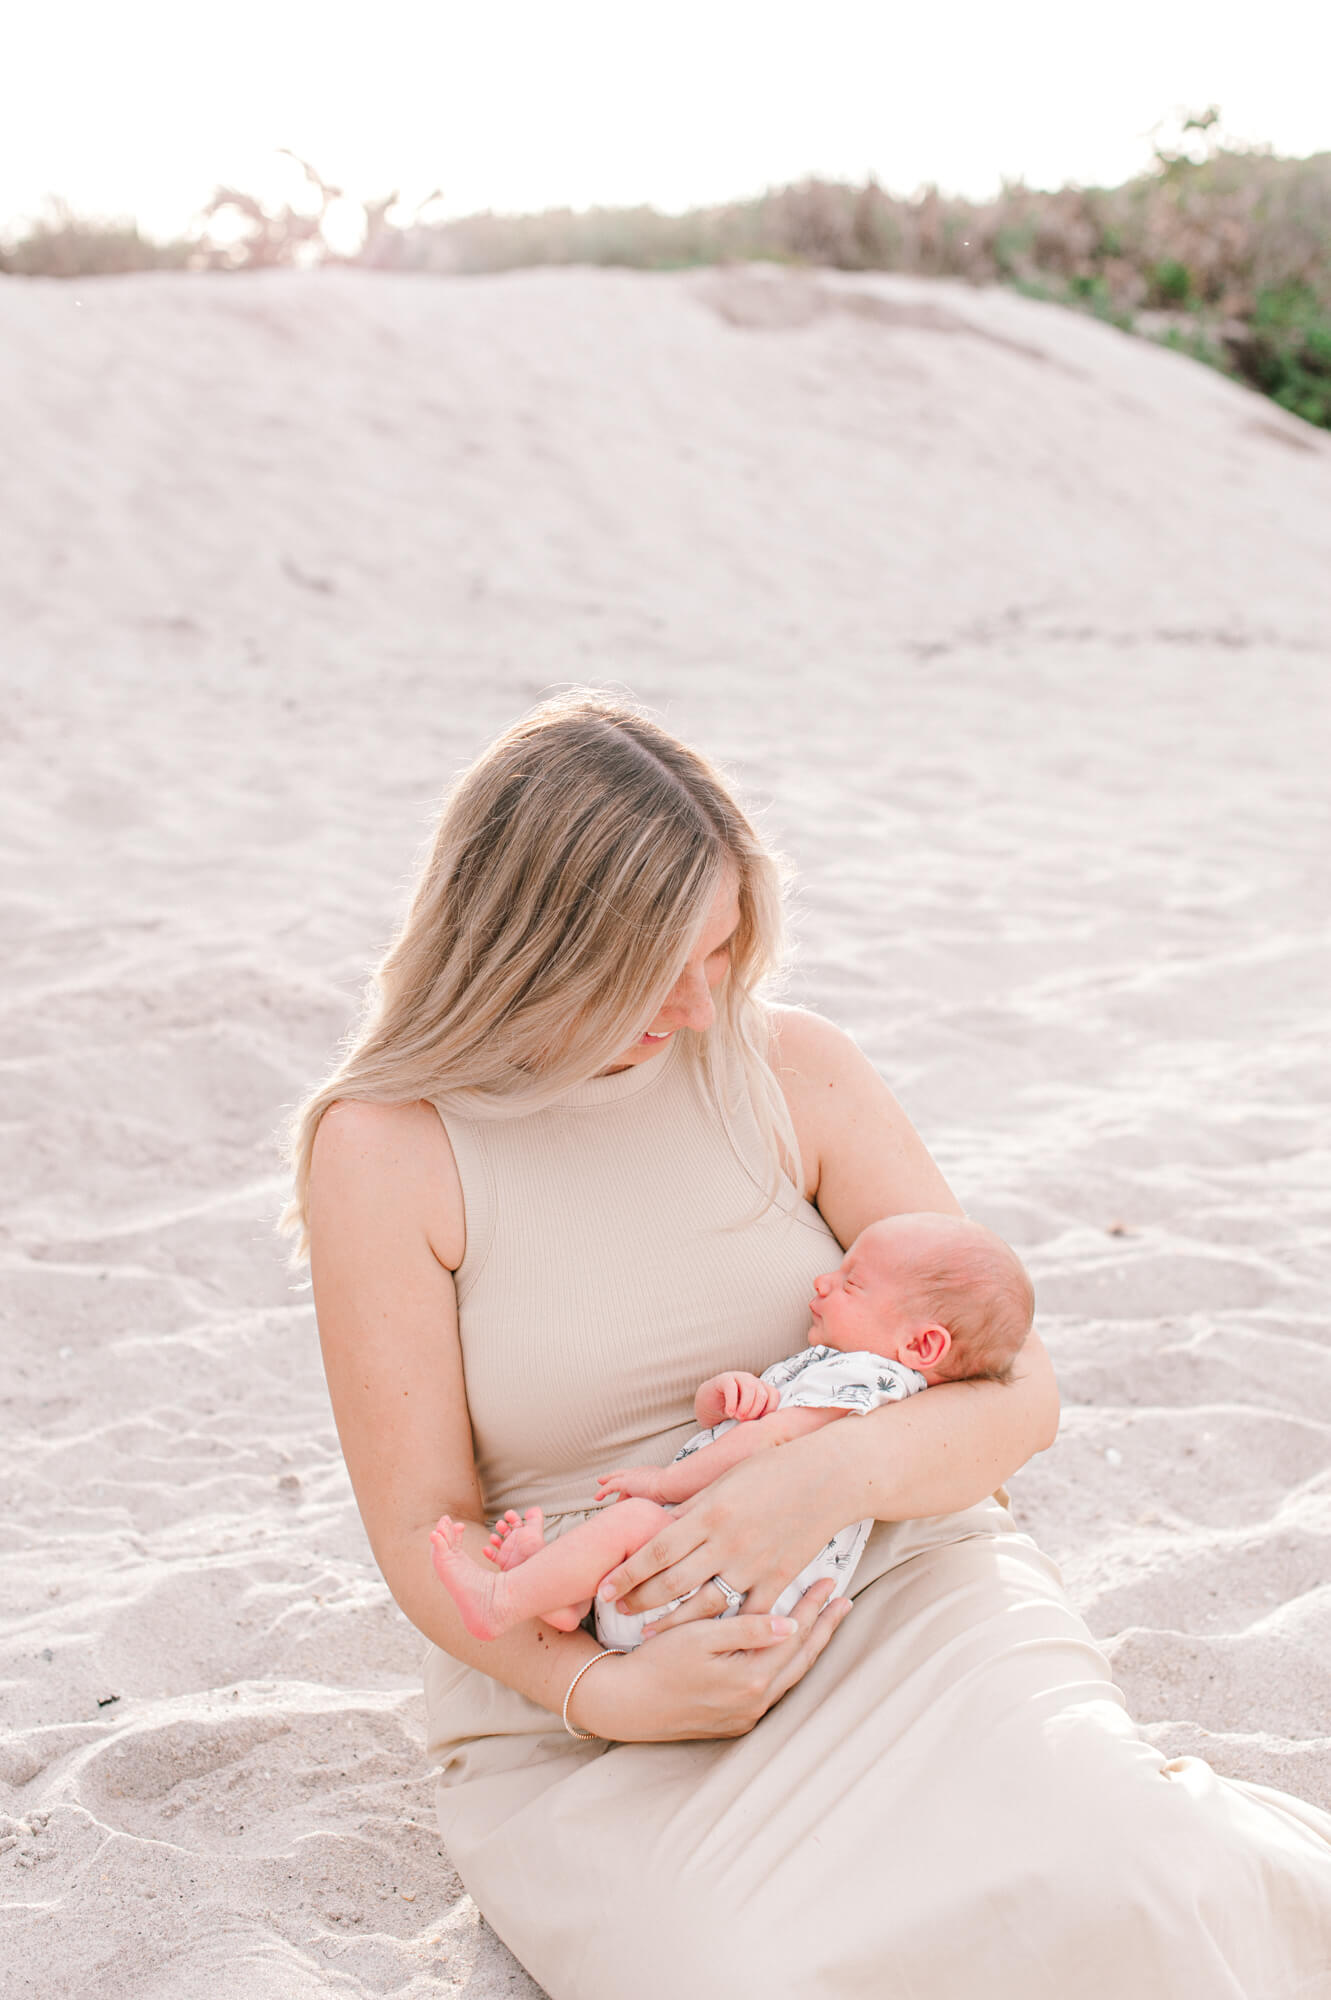 New young mom sits near the dunes on the beach at sunset holding her sweet new bundle of joy, her newborn baby boy Orlando baby stores